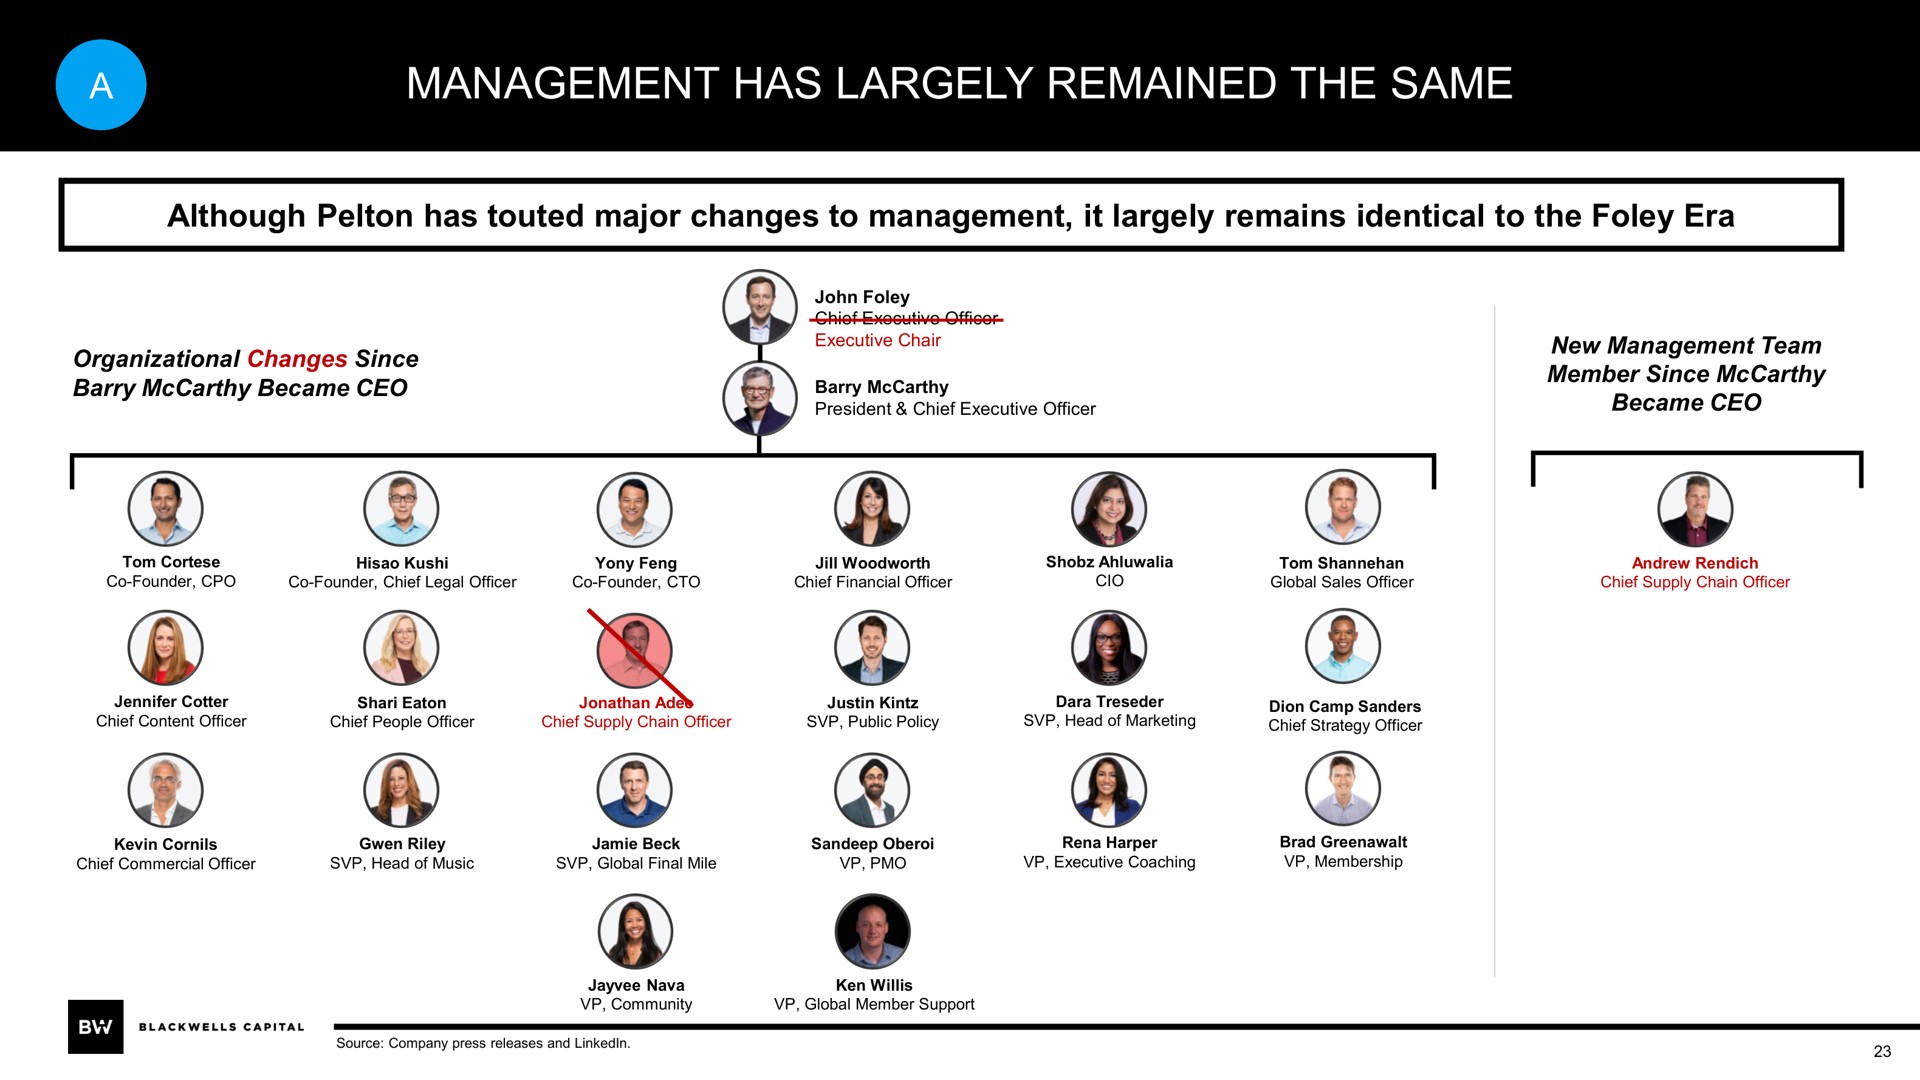 a management has largely remained the same | Blackwells Capital